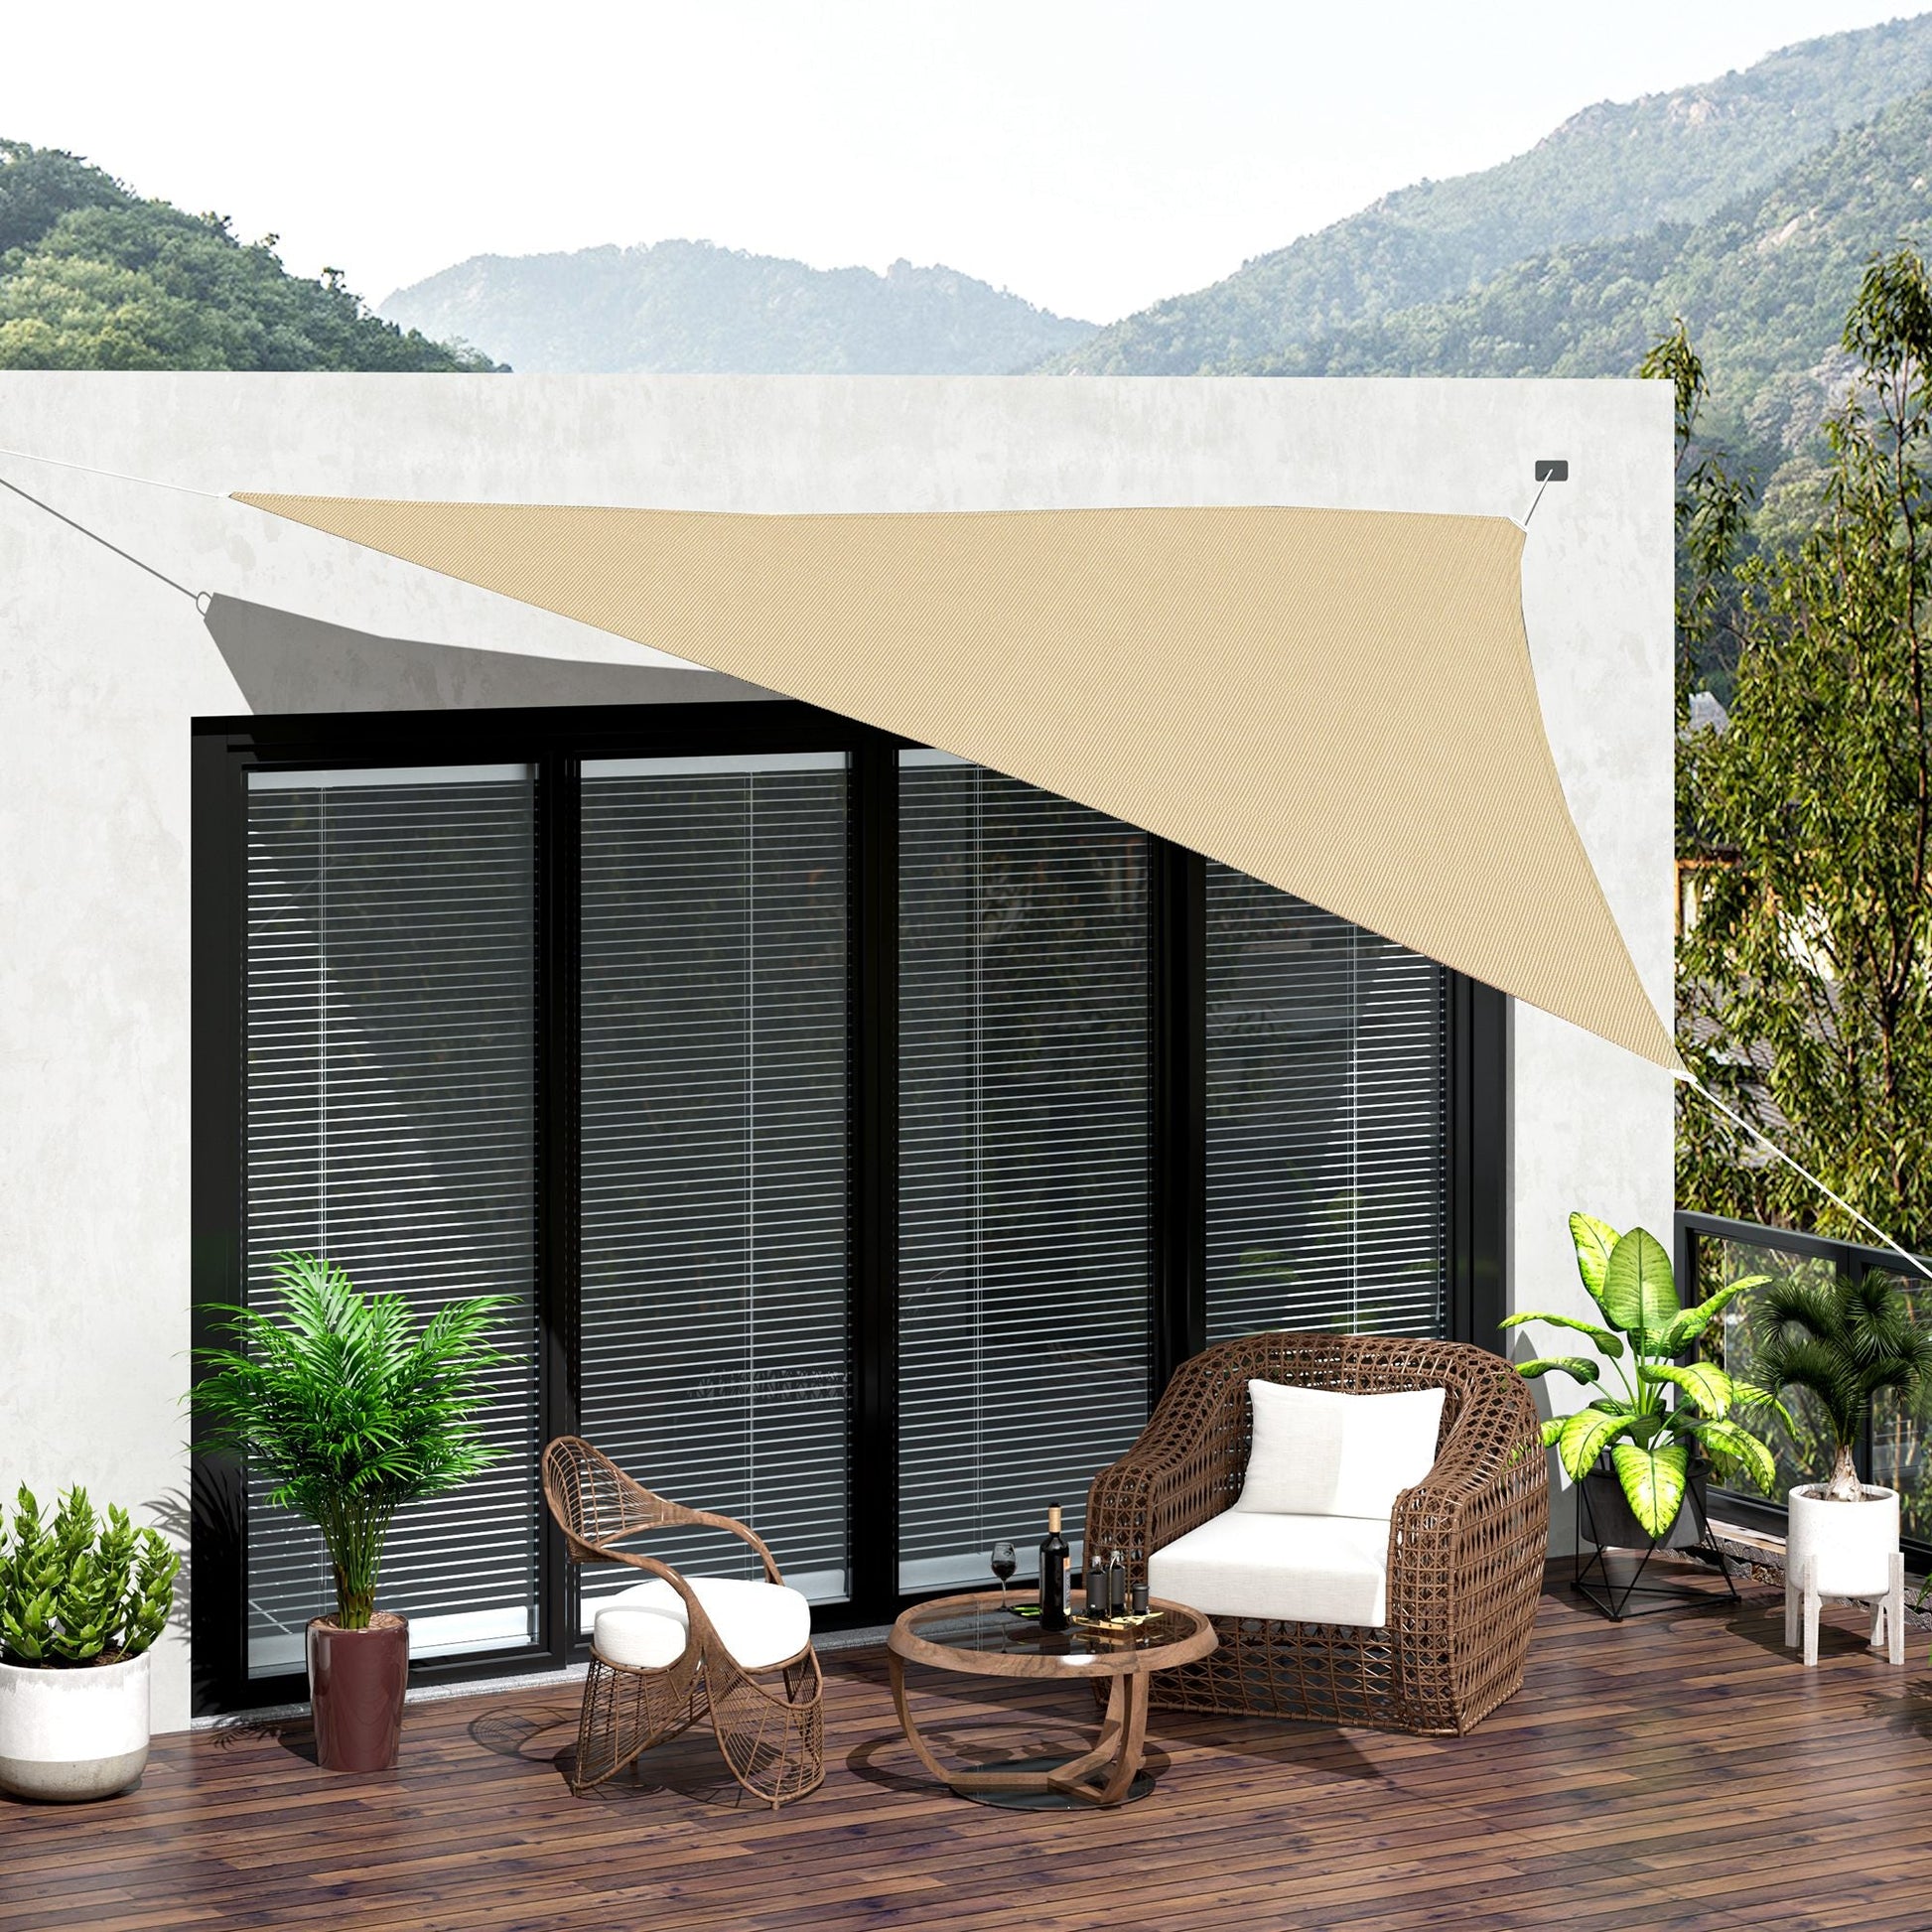 Triangle 18’ Canopy Sun Sail Shade Garden Cover UV Protector Outdoor Patio Lawn Shelter with Carrying Bag Beige at Gallery Canada